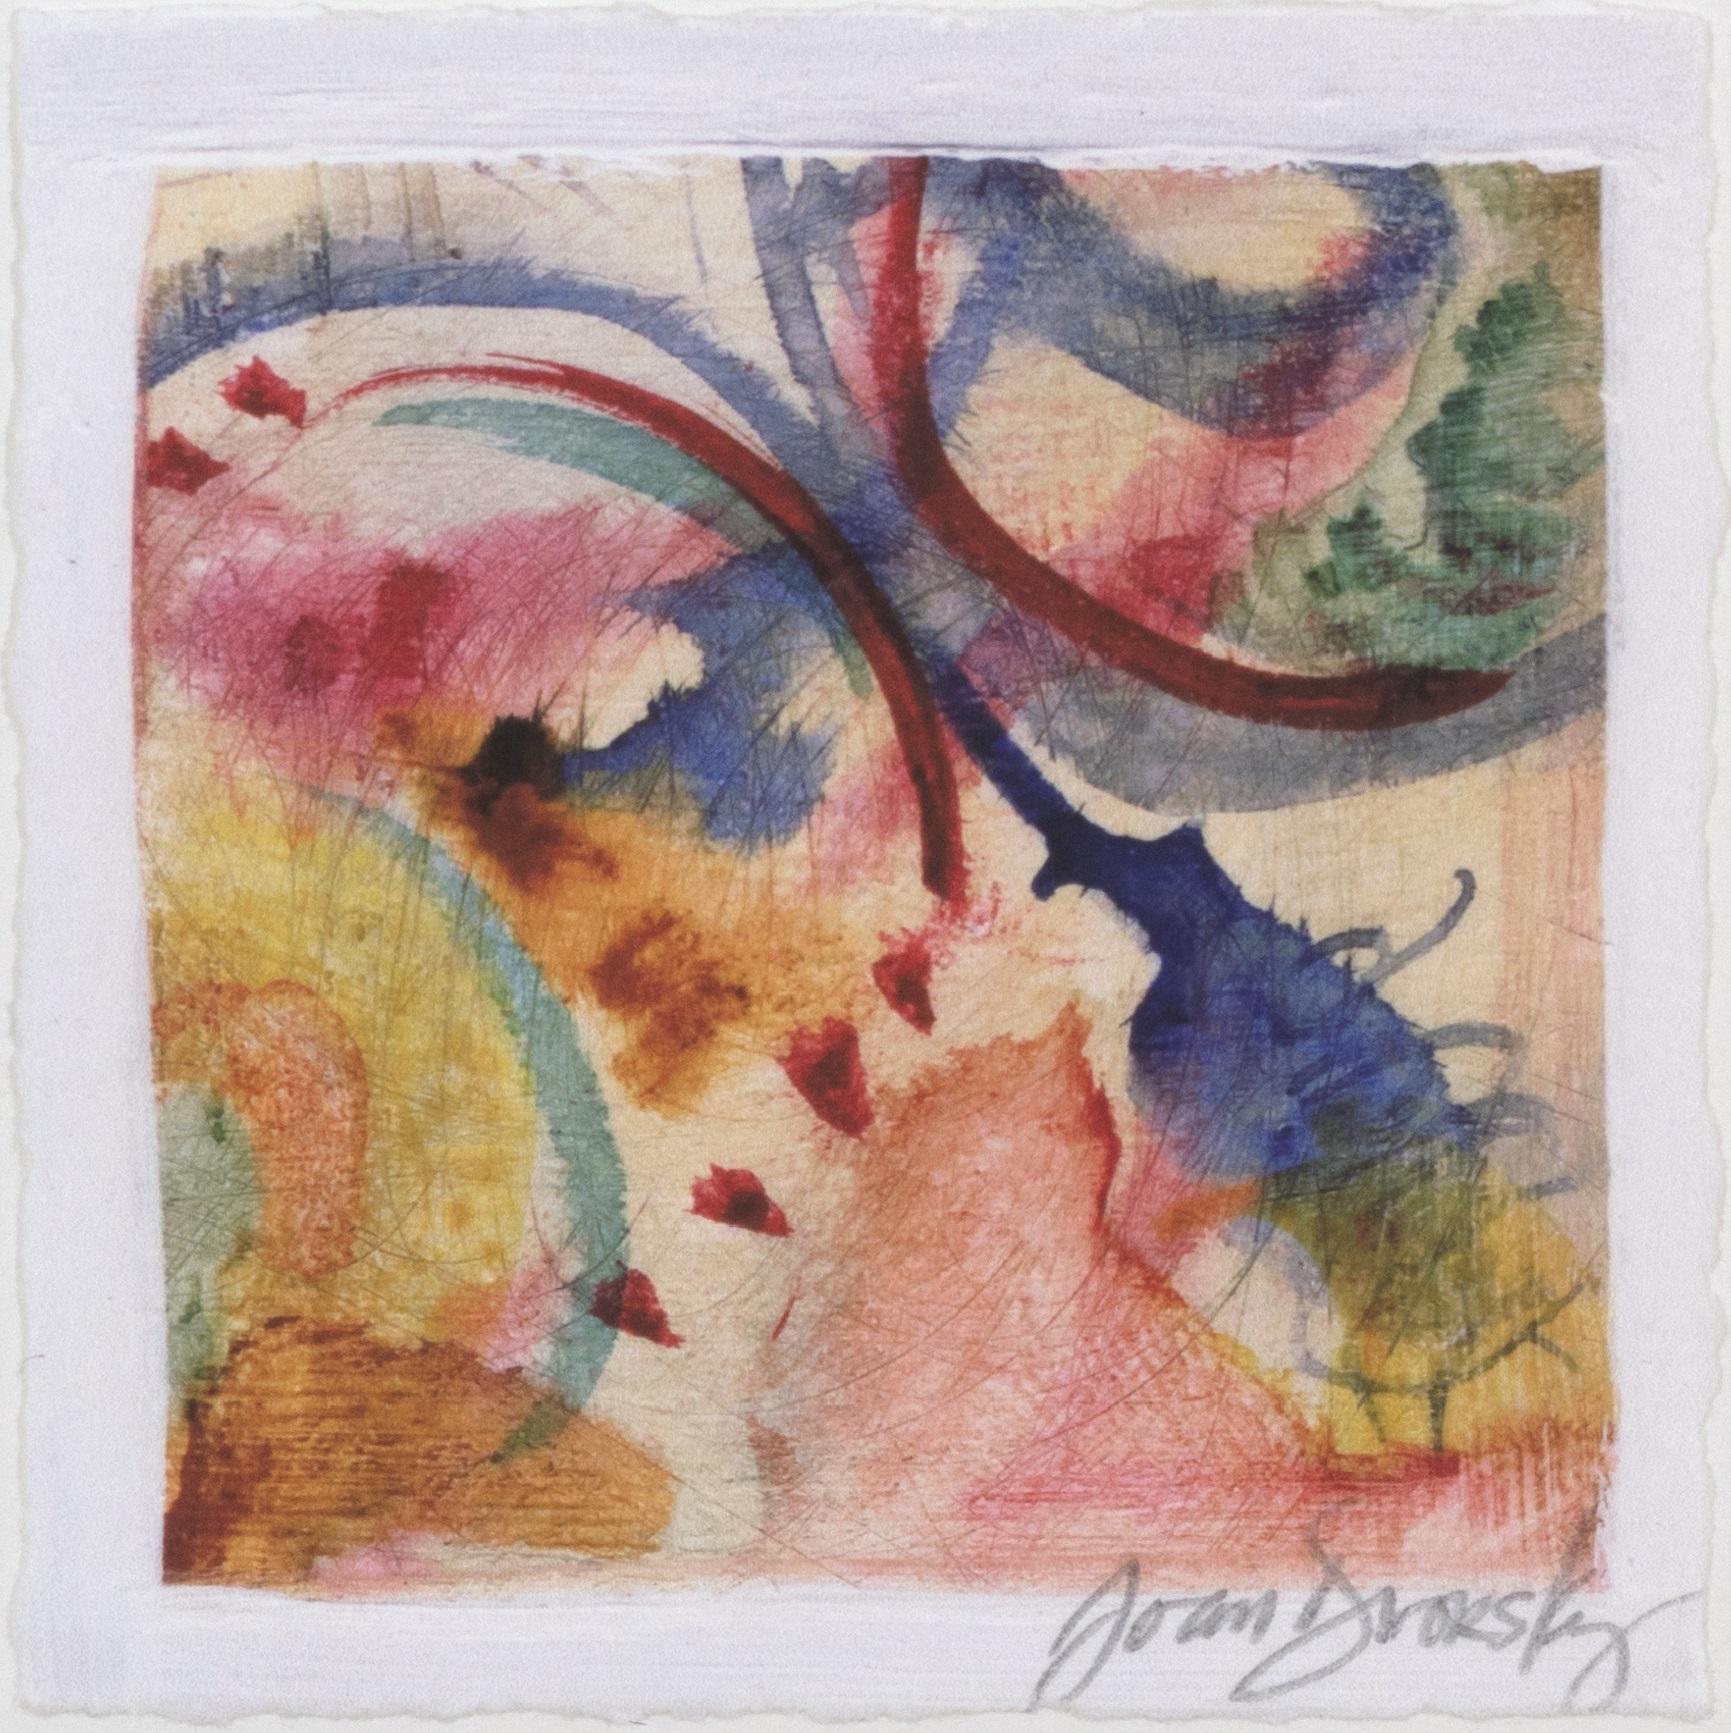 In this artwork, Milwaukee-based artist Joan Dvorsky presents the viewer with a composition of shapes and colors that abstractly and subtly resemble a beautiful, colorful and complex butterfly. The artwork incorporates a digital print of an earlier